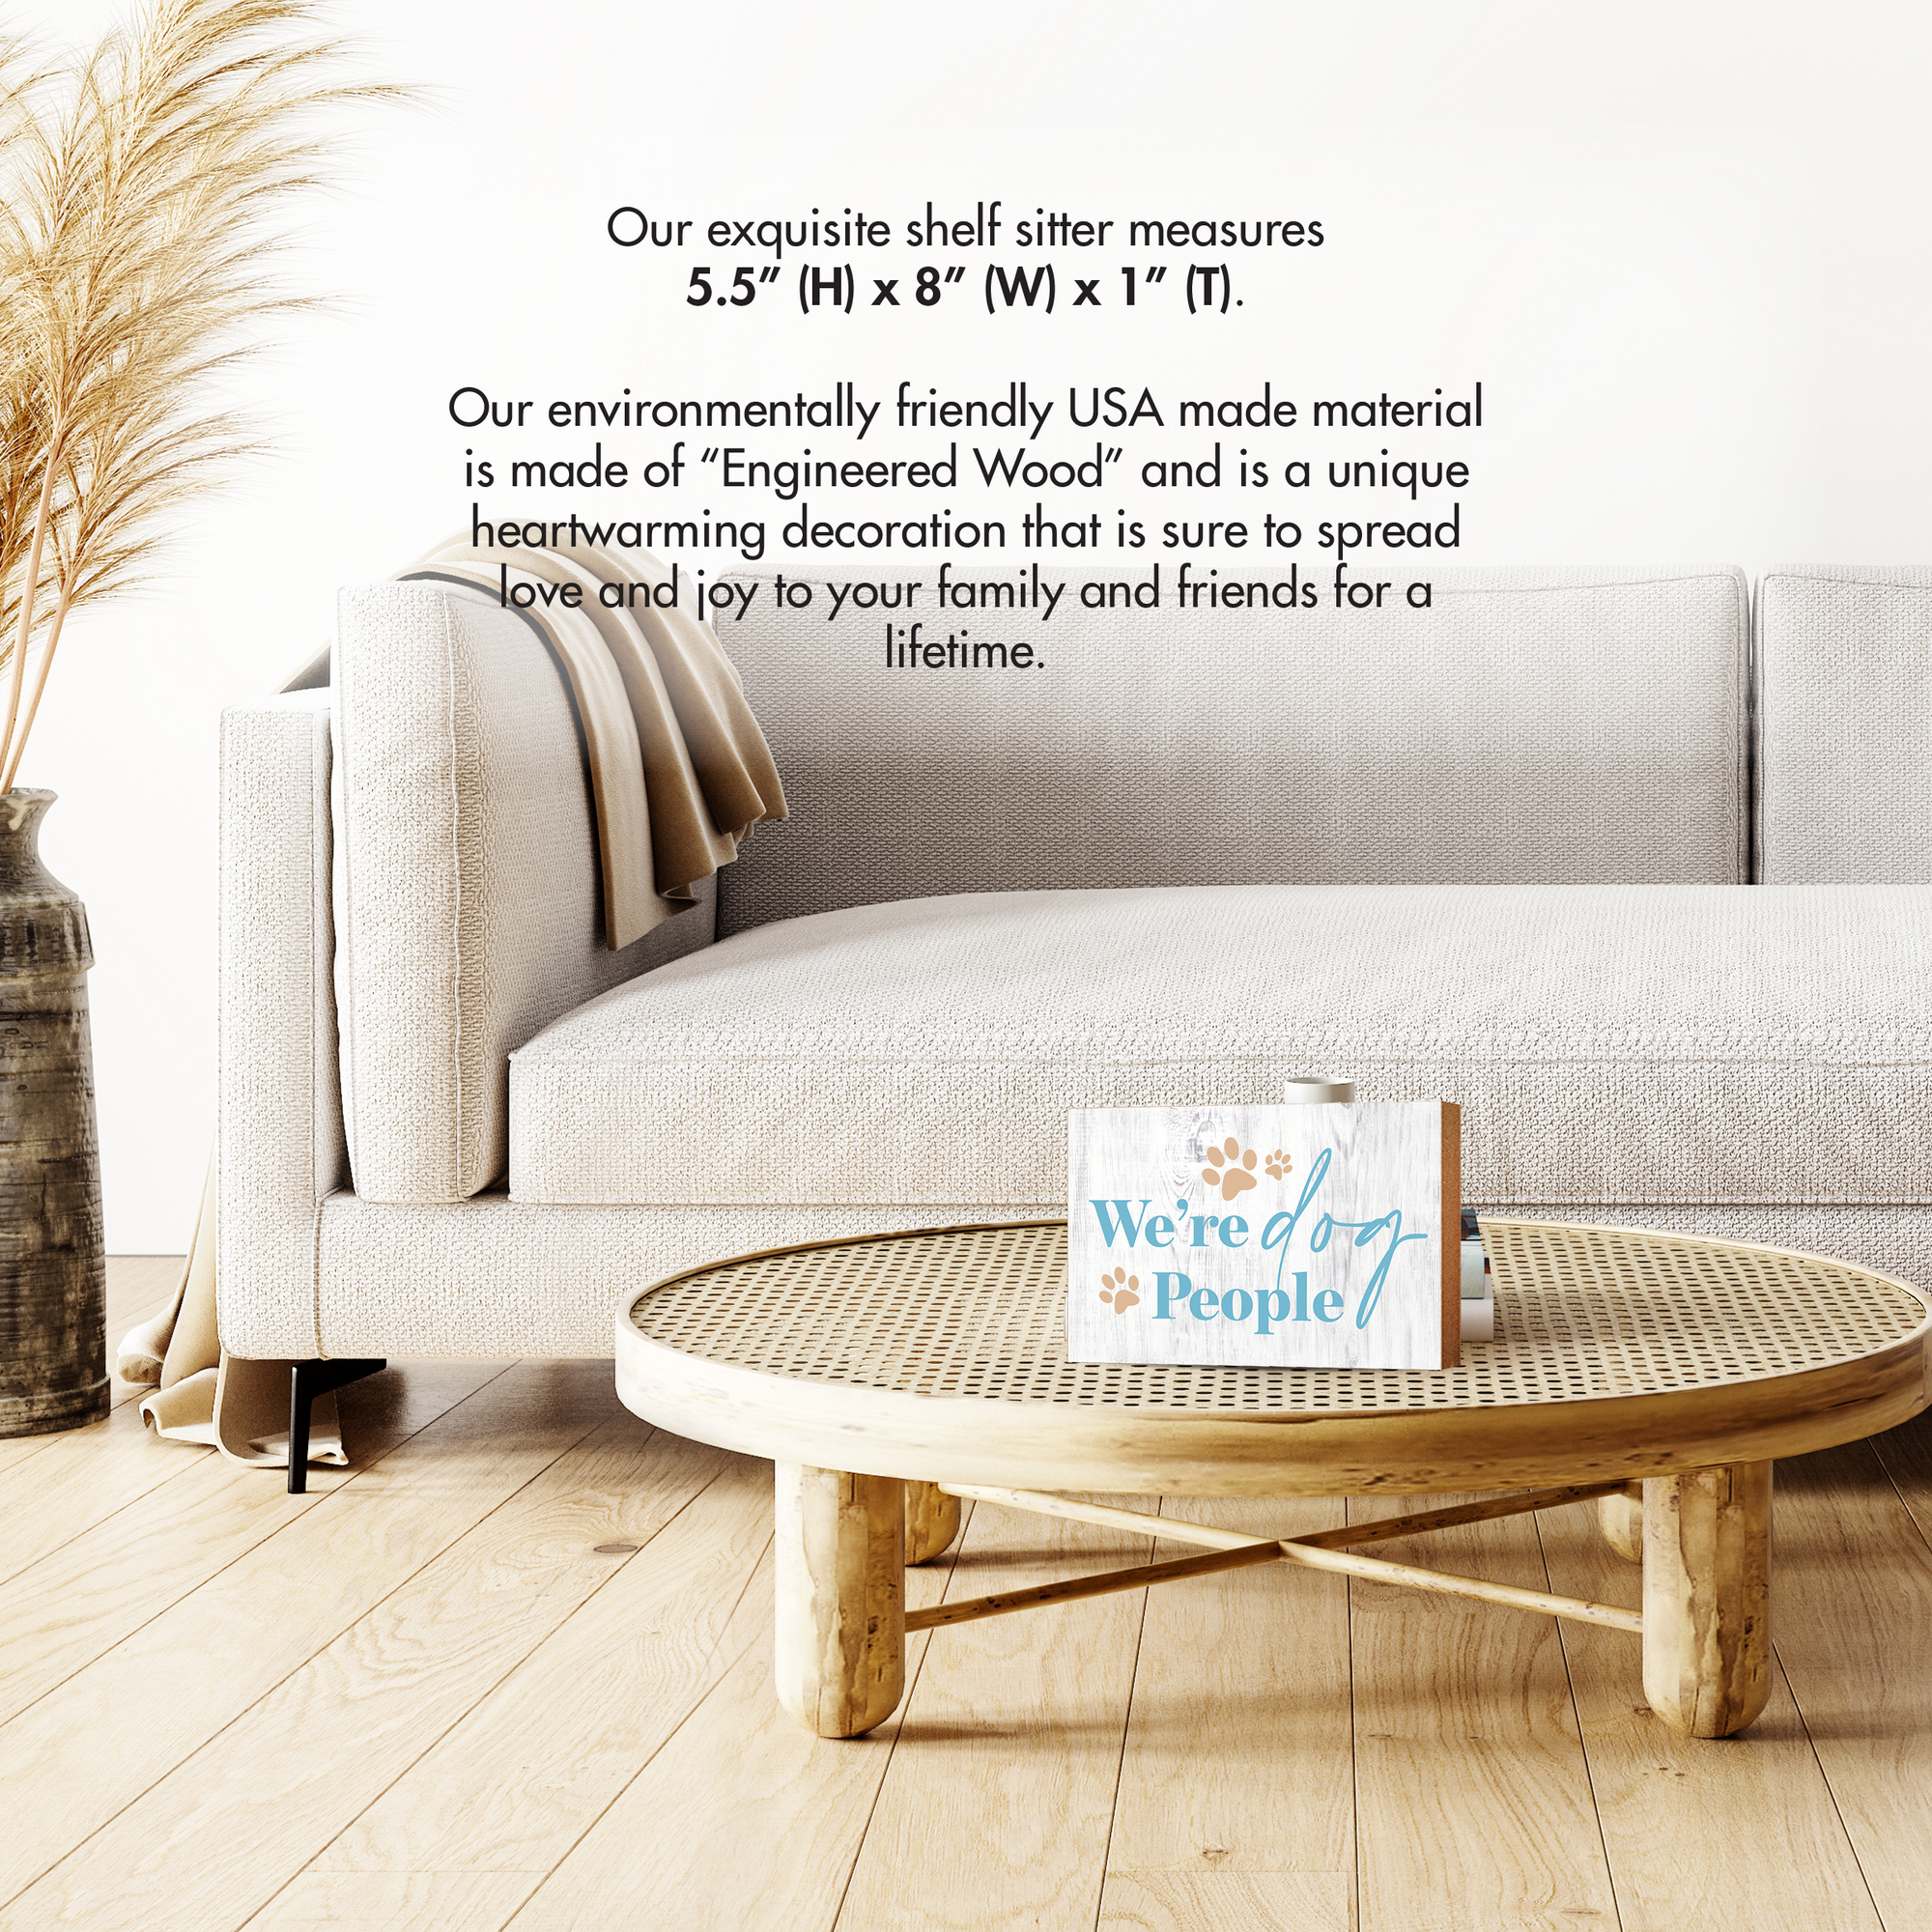 Wooden Shelf Decor and Tabletop Signs with Pet Verses - We're Dog People